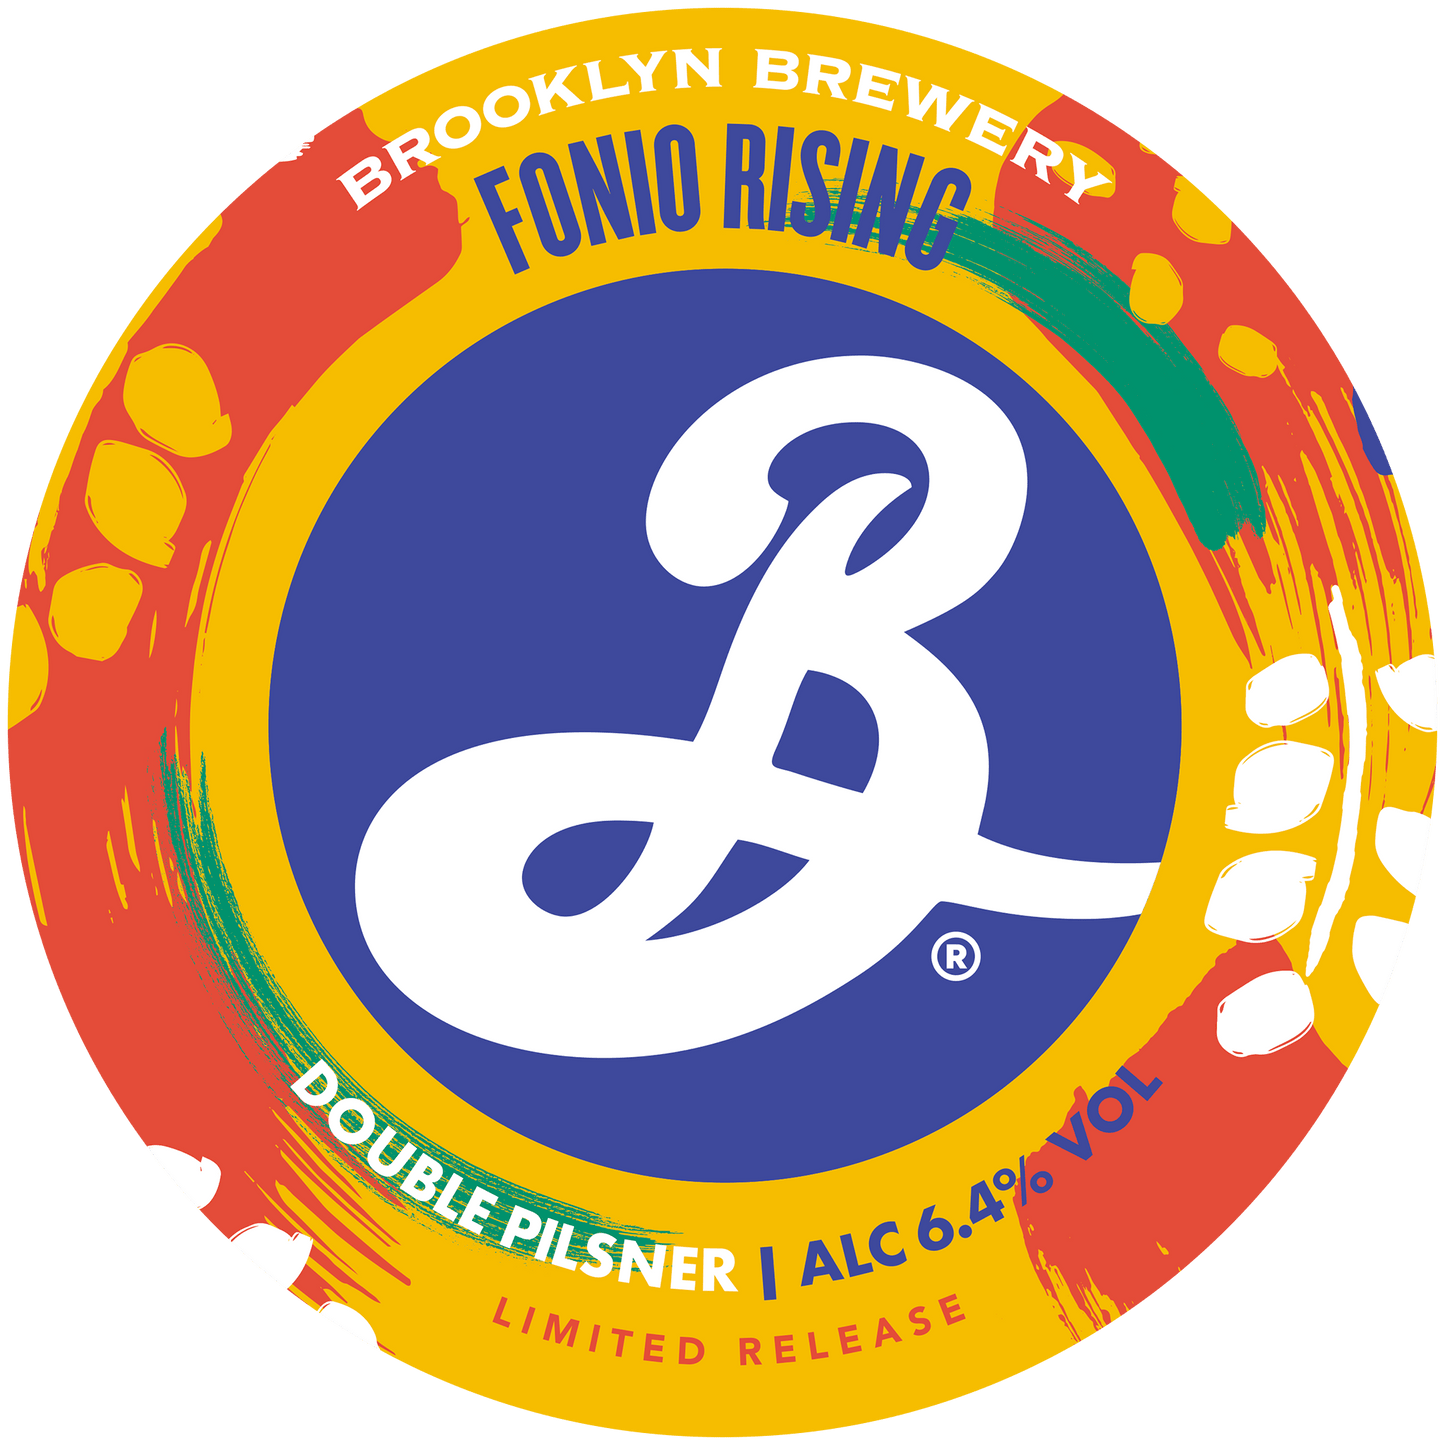 Brooklyn Double Pilsner - Linecut